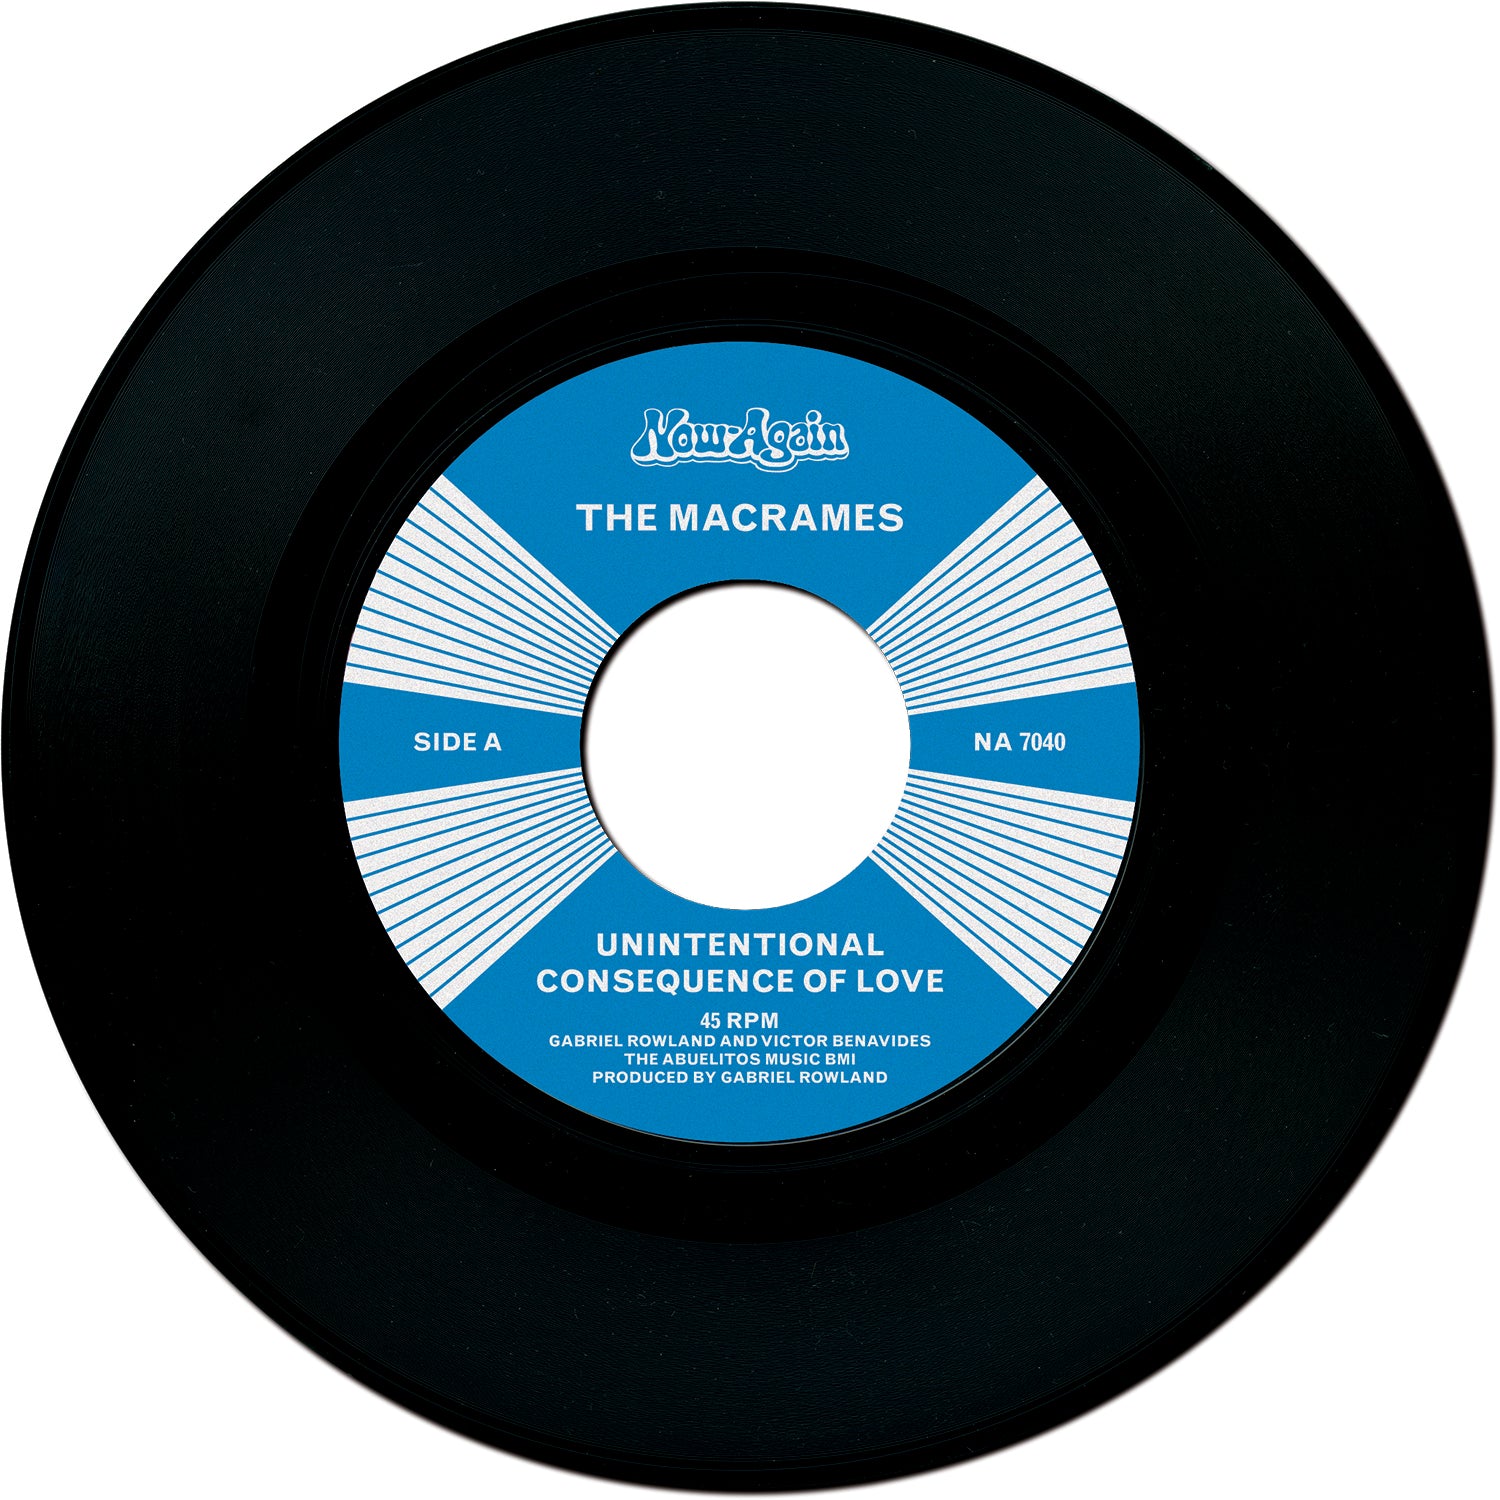 THE MACRAMES - UNINTENTIONAL CONSQUENCE OF LOVE Vinyl 7"